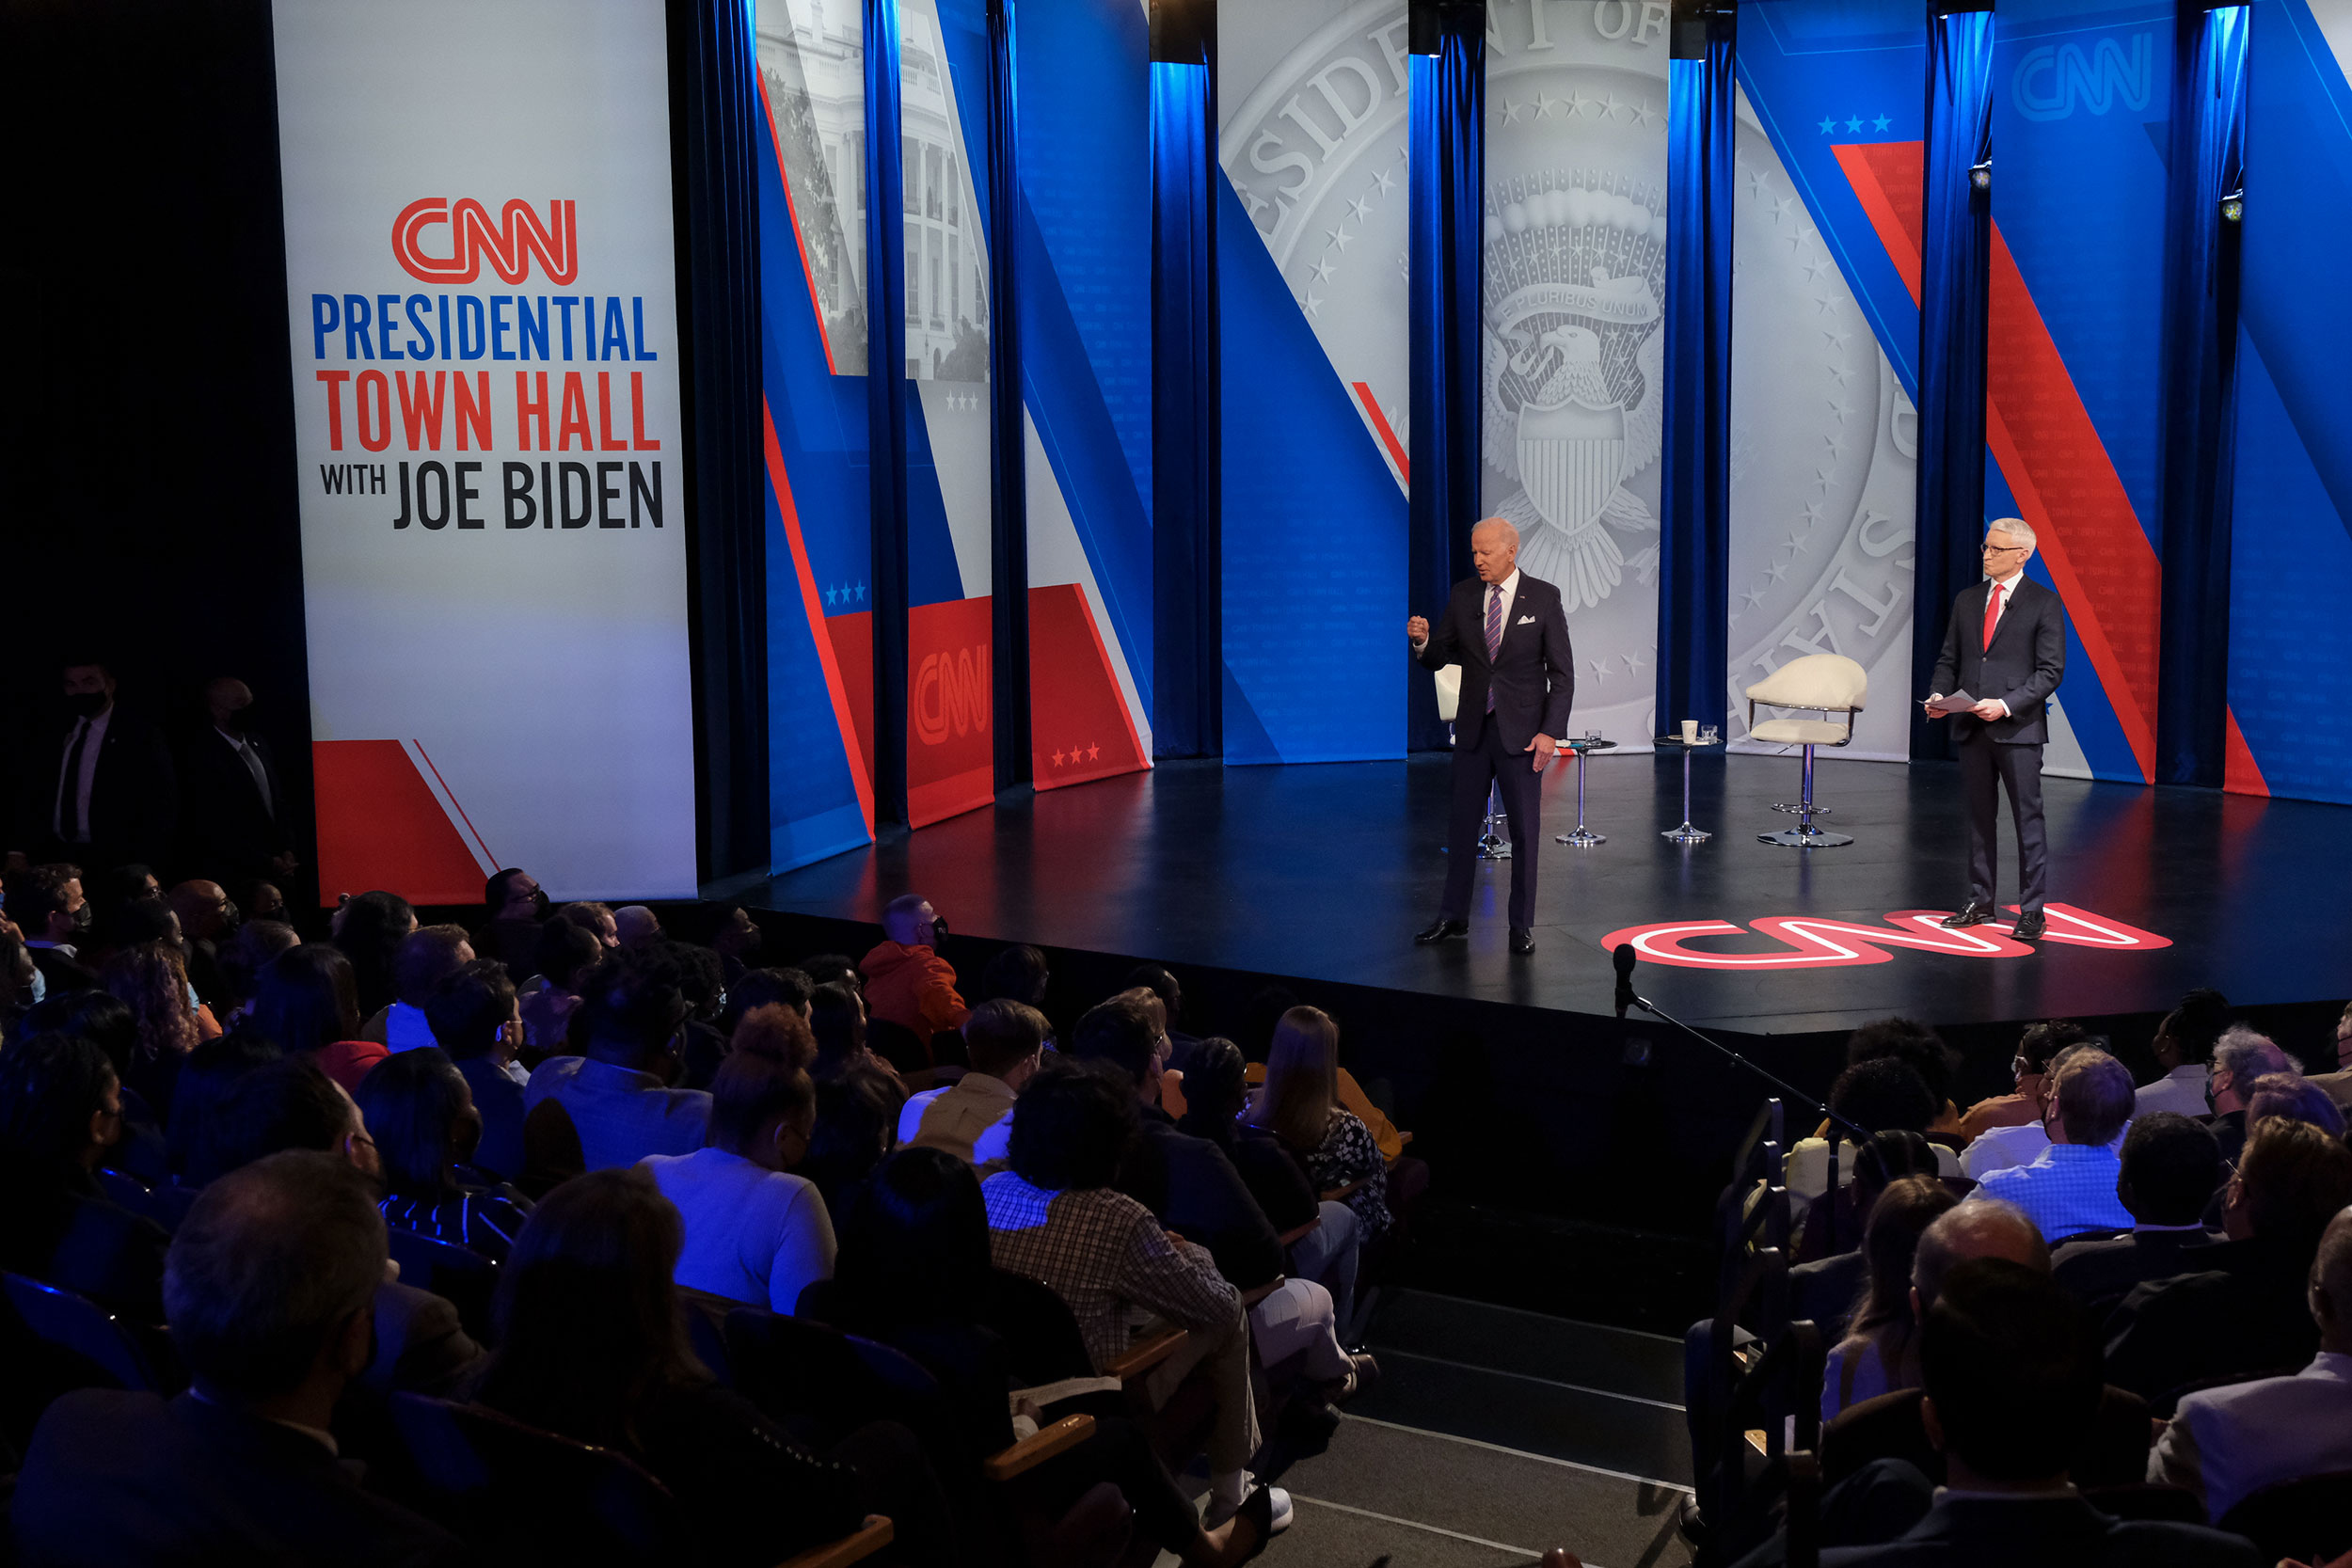 President Joe Biden speaks to the audience while CNN anchor and host Anderson Cooper listens during CNN's Presidential Town Hall in Baltimore, Maryland, on October 21.